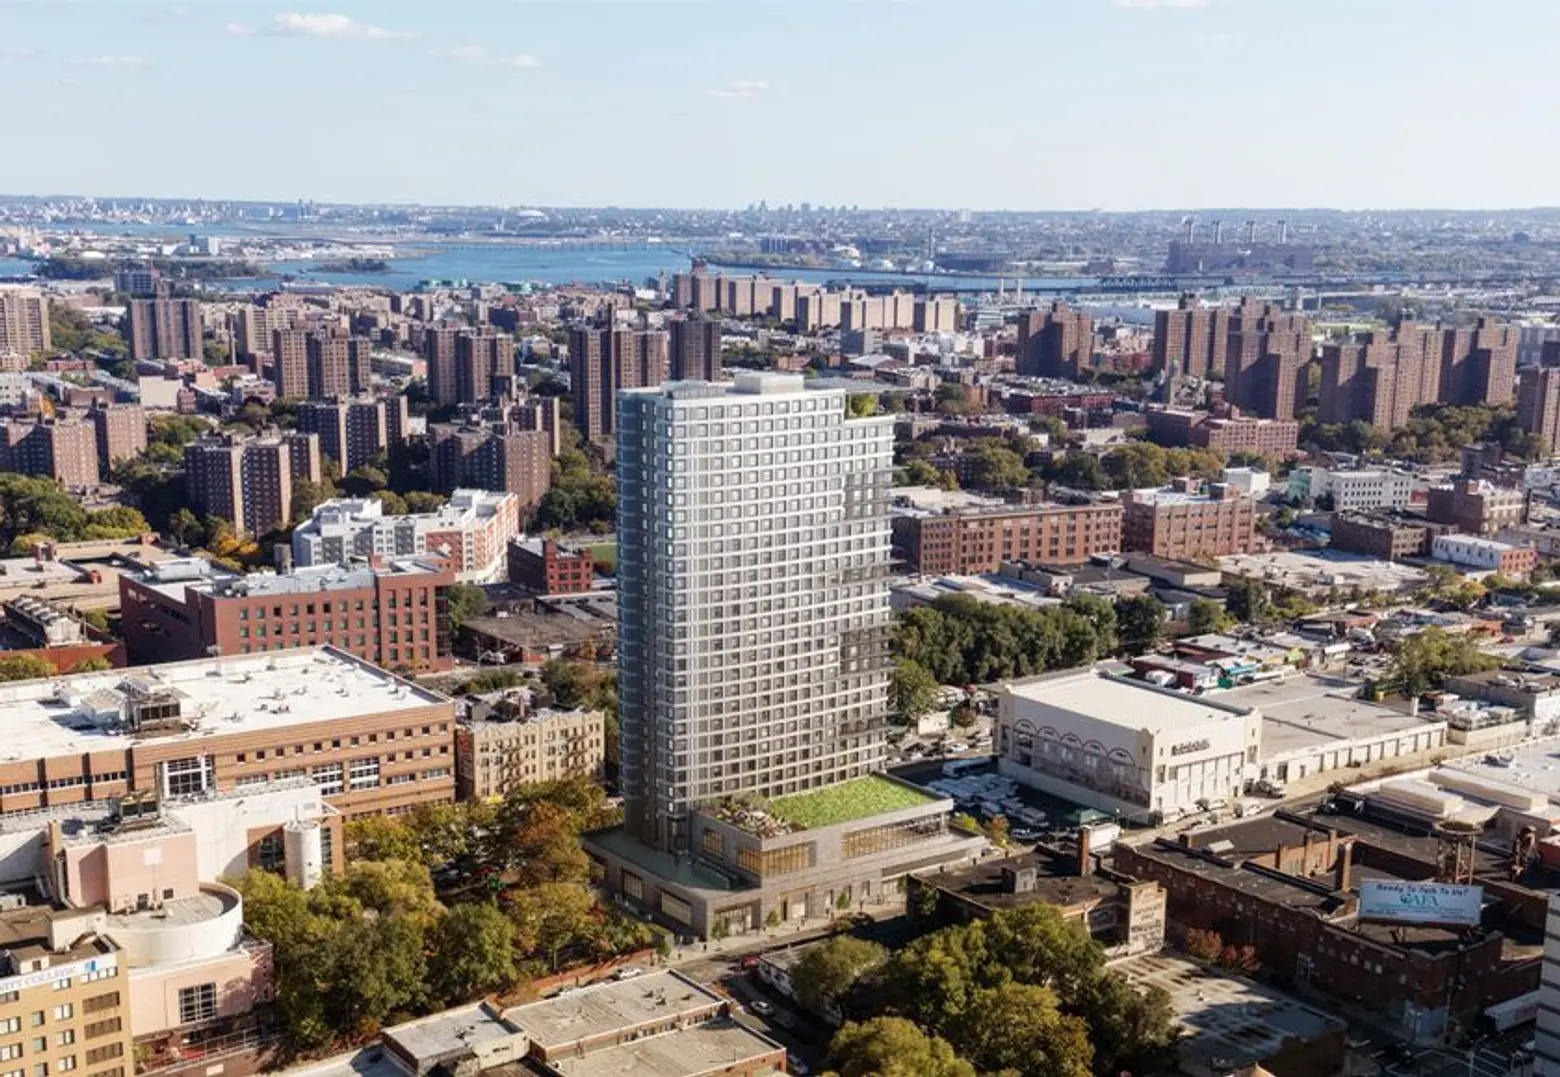 Apply for 248 mixed-income units at new Passive House tower in the South Bronx, from $362/month